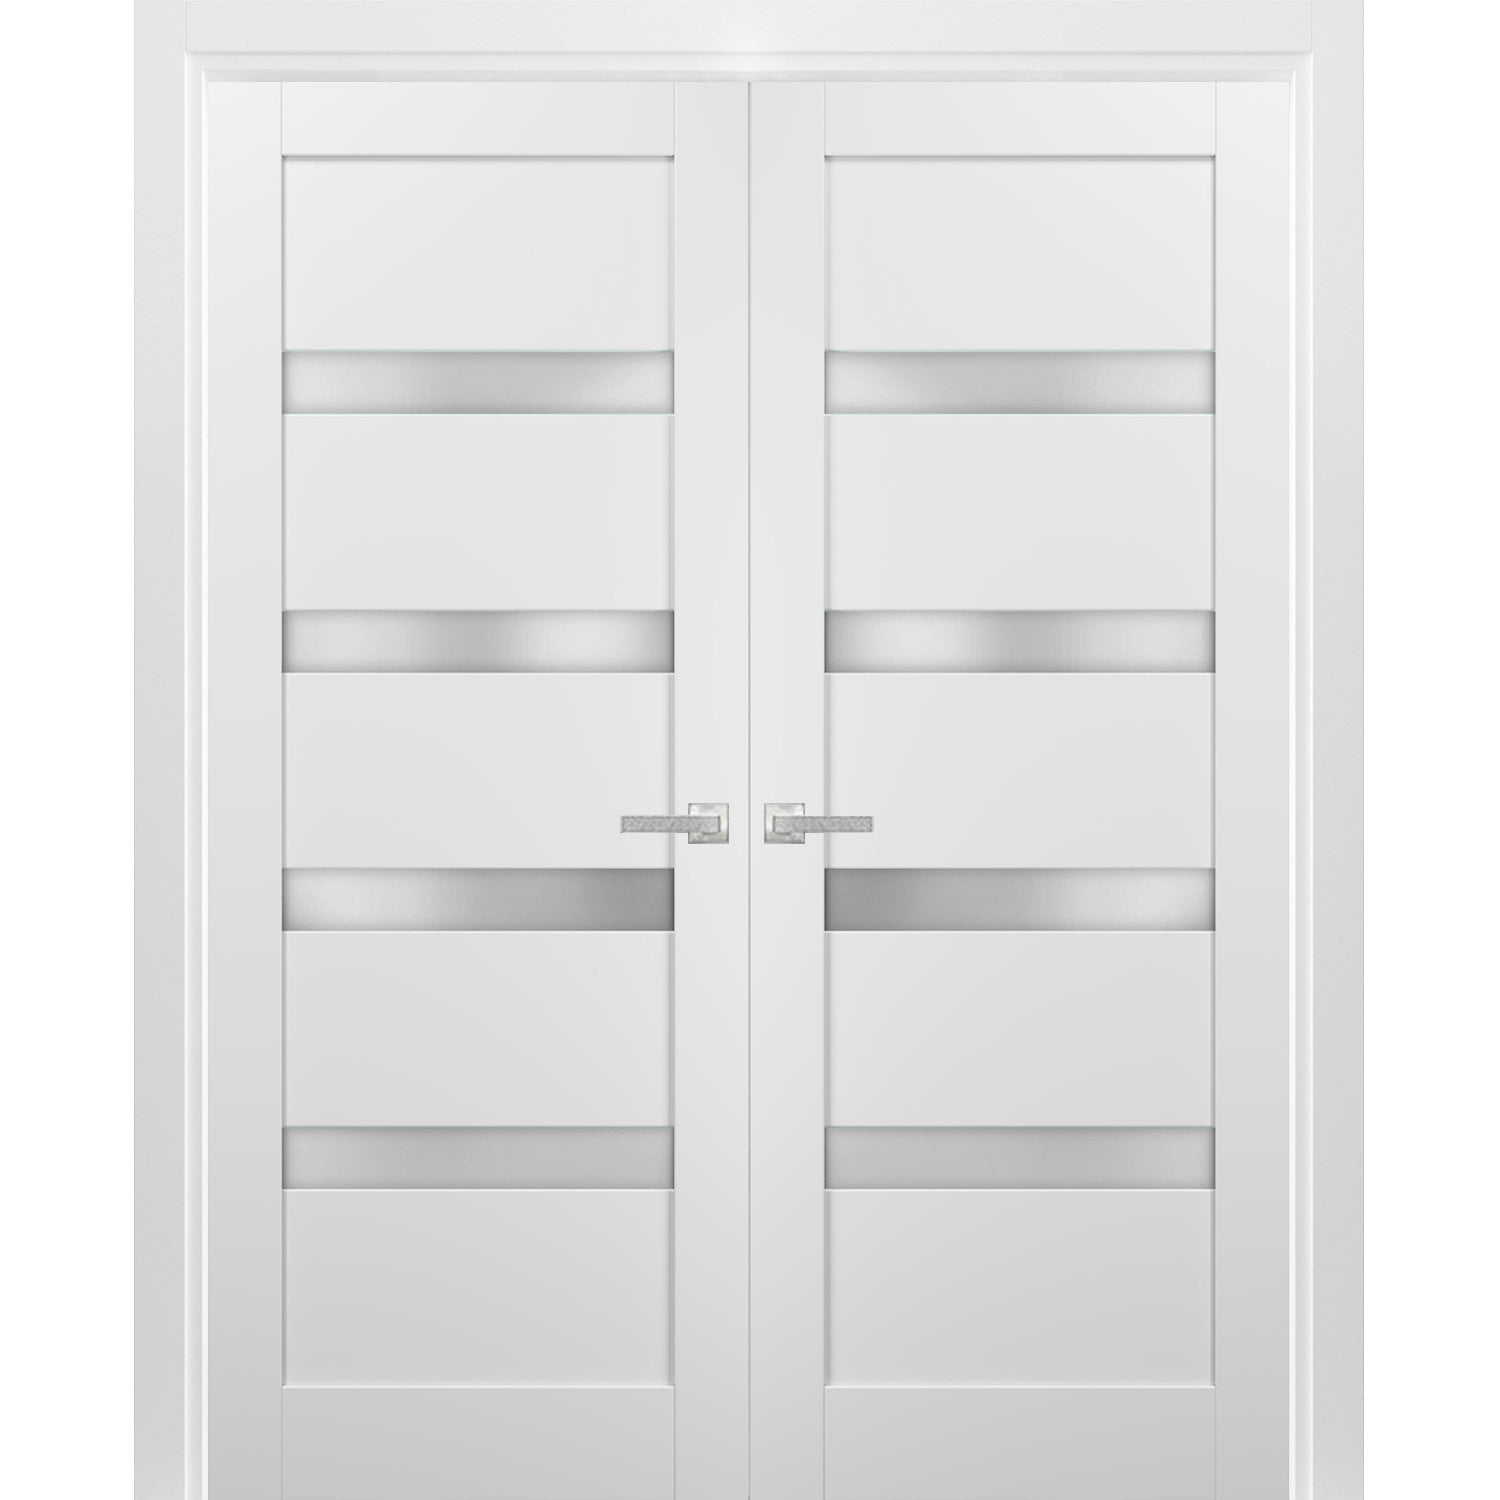 Solid French Double Doors 56 x 80 inches - Walmart.com